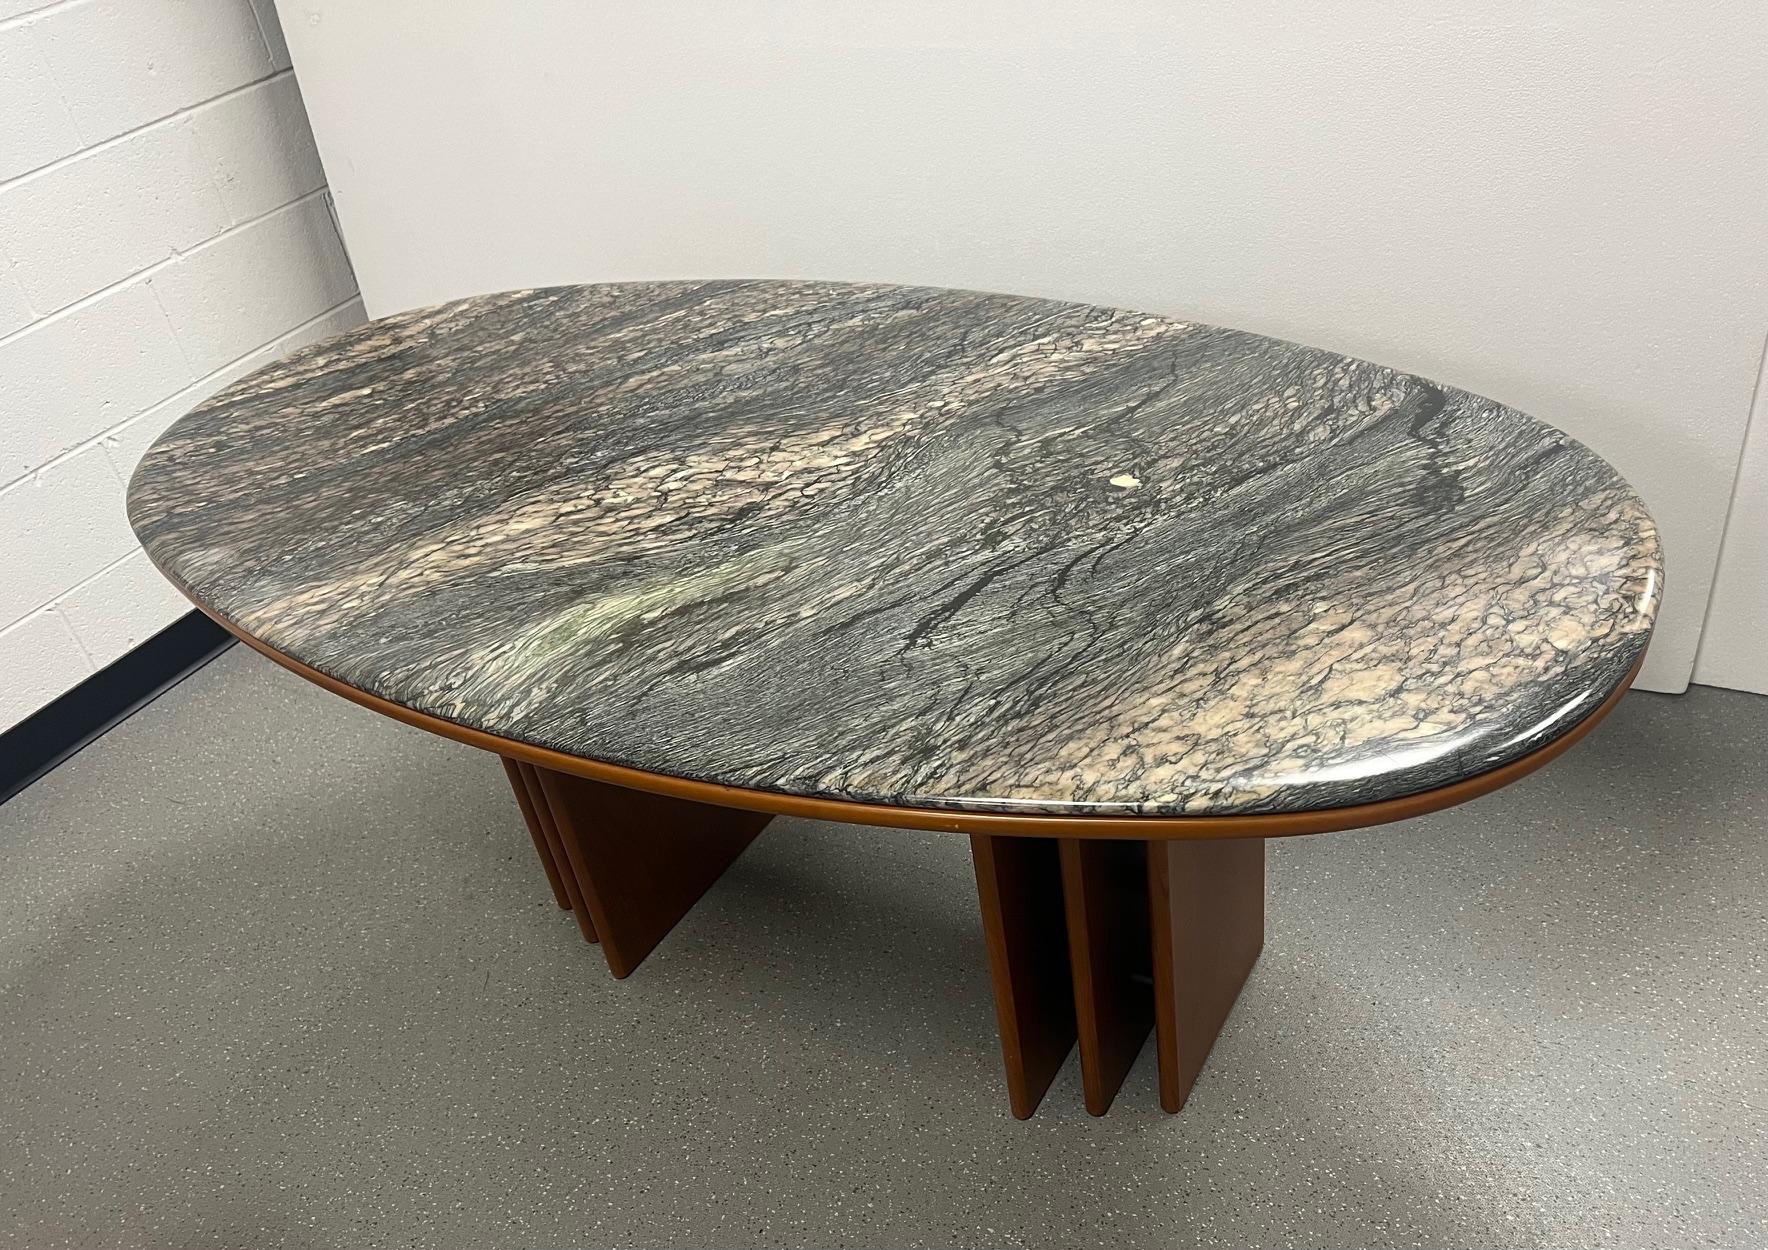 This is an oval Danish teak and marble top dining table, Seats 6 comfortably. Very nice condition. Minimal wear. Made by Bendixen. Label on the wood table top. The table has a wood table top base. The marble top sits on the wood base. 
Dimensons: